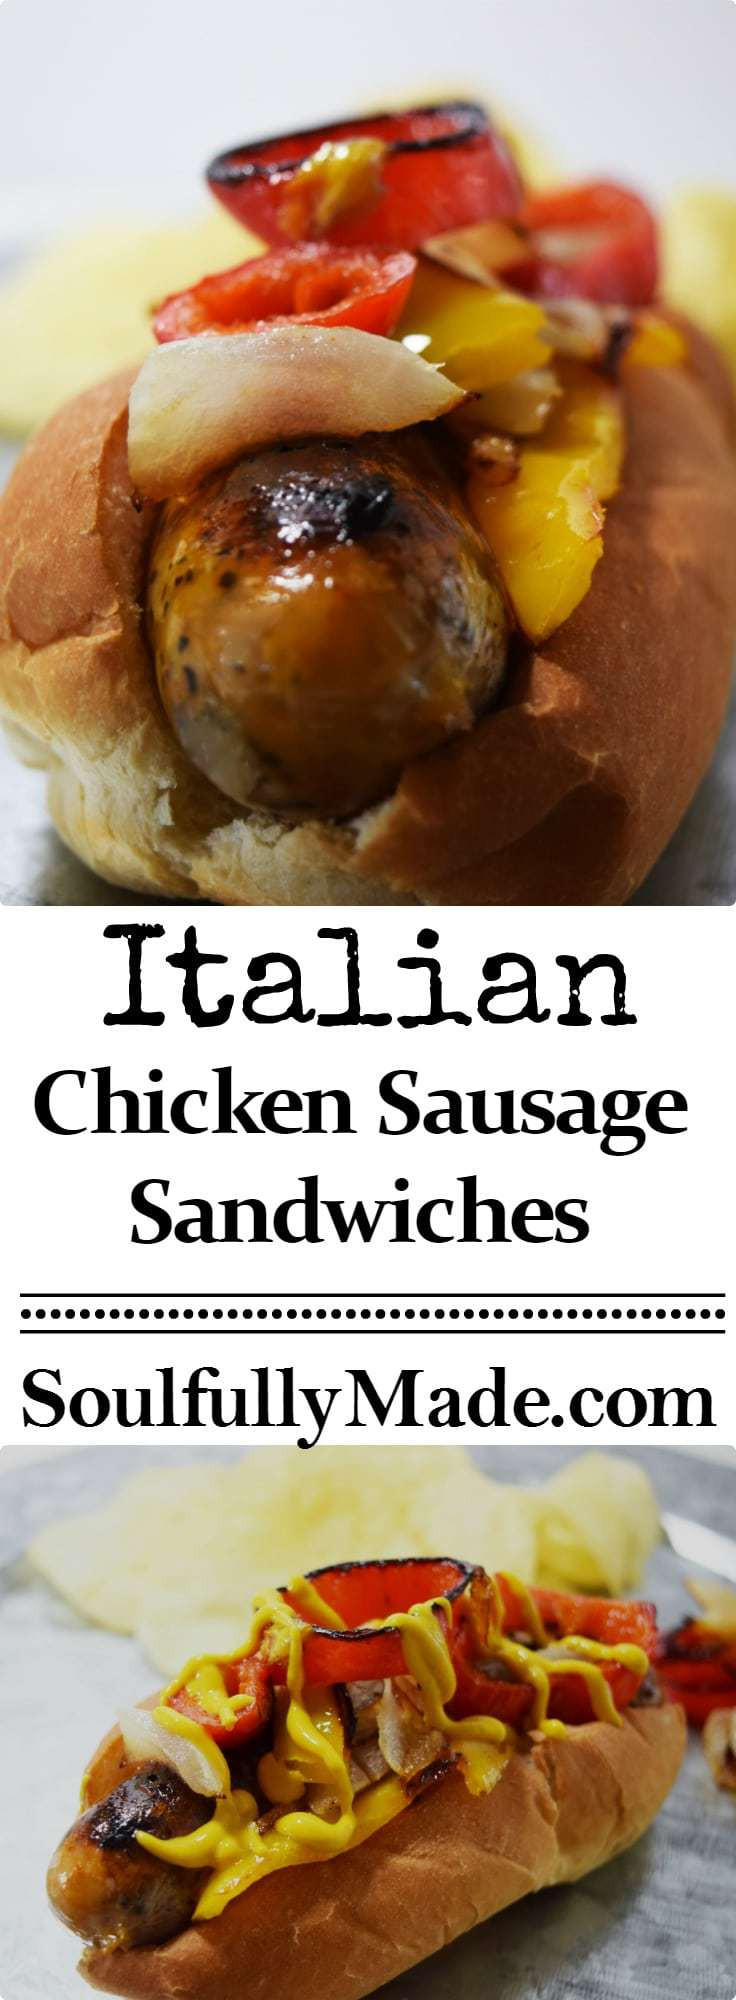 Italian Chicken Sausage
 Easy Italian Chicken Sausage Sandwiches with Peppers